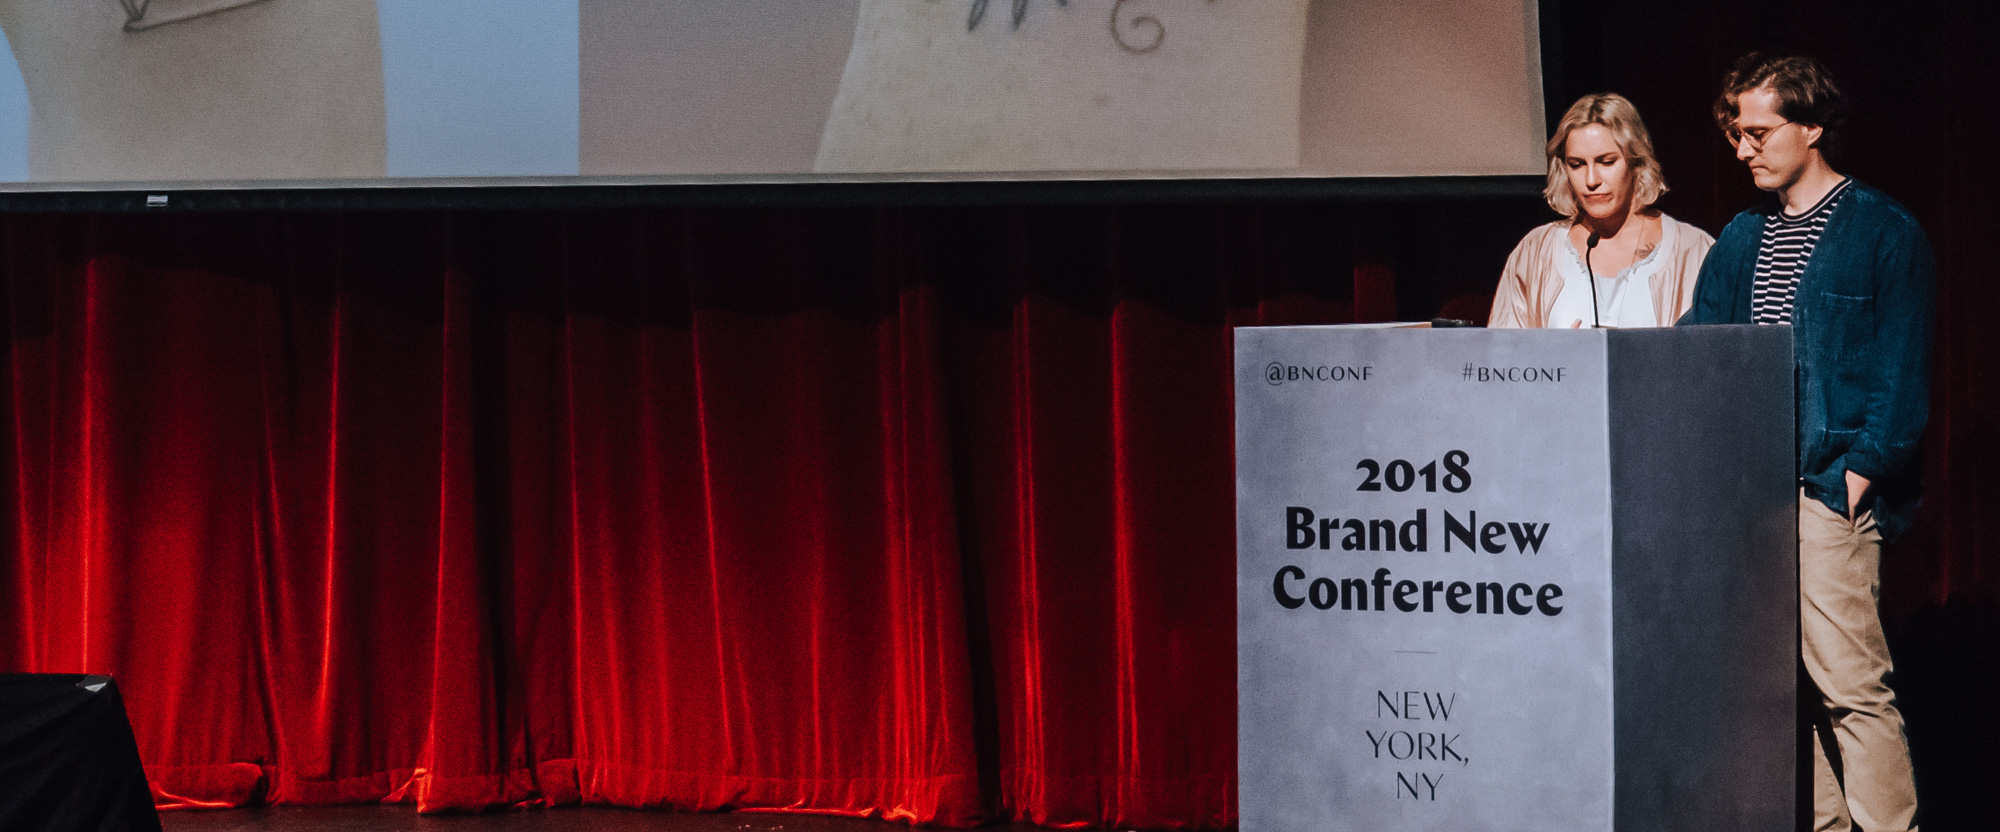 2018 Brand New Conference: Photos, Tweets, and Videos